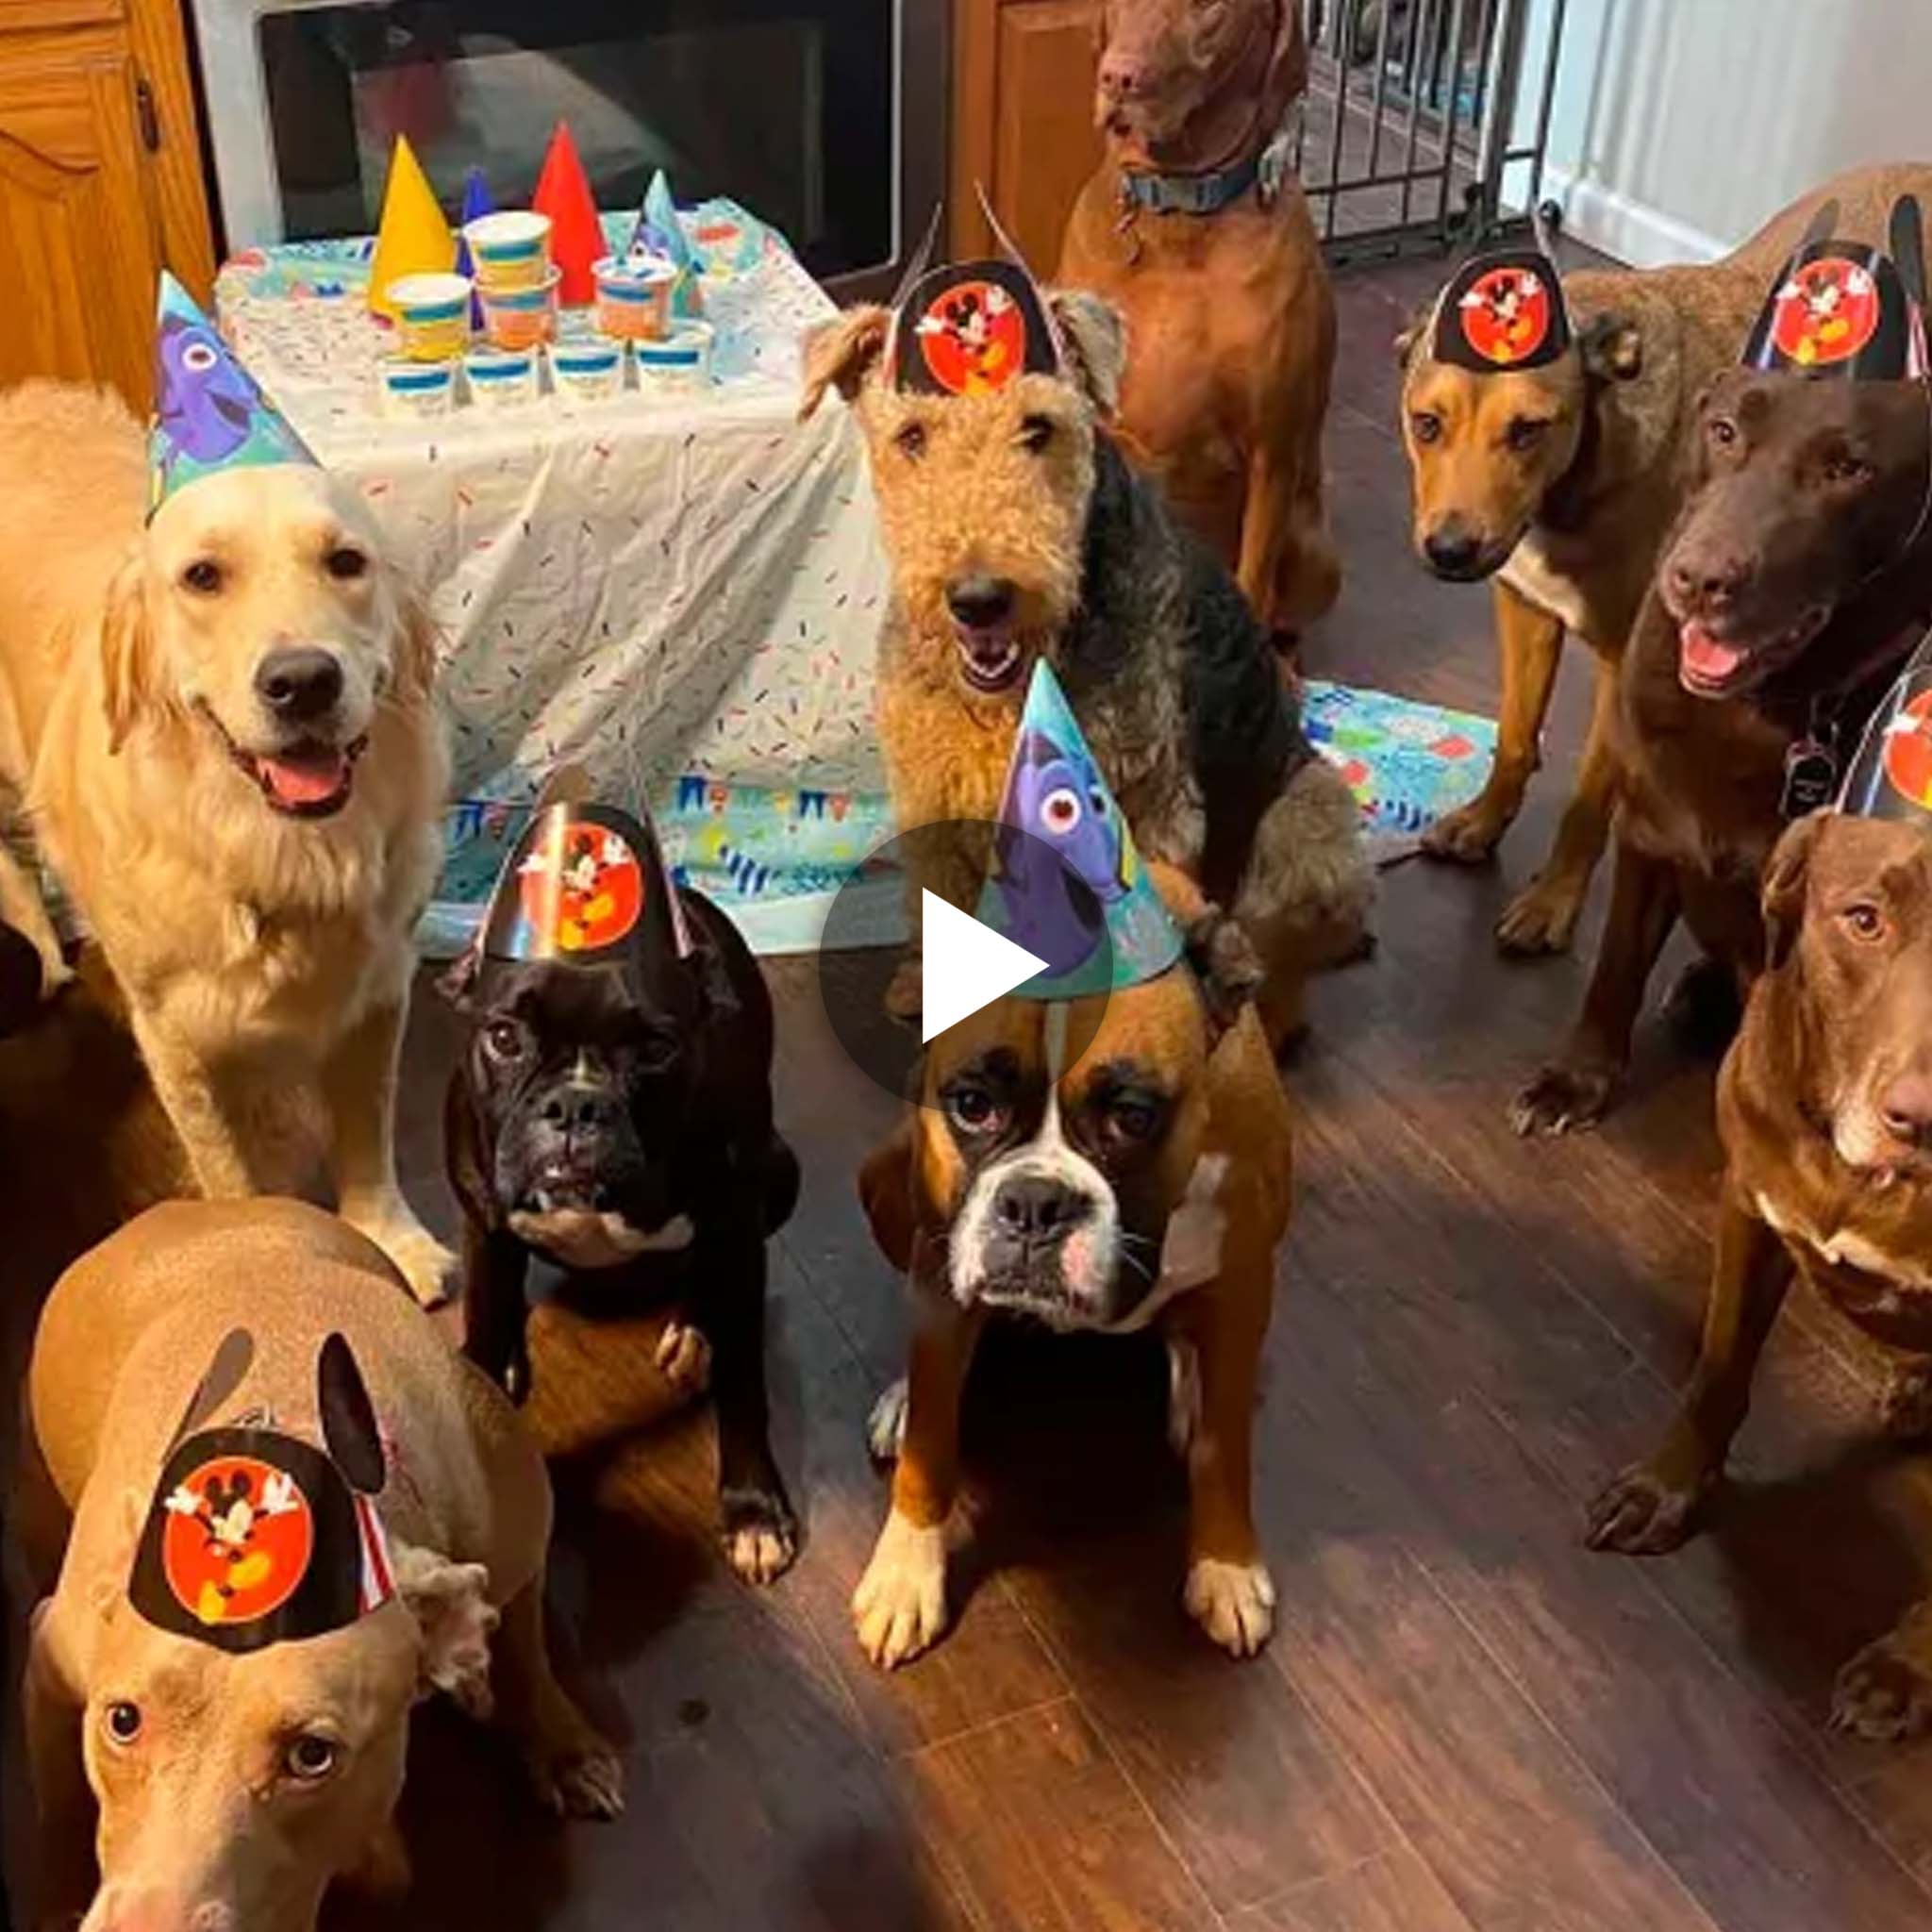 With his new best friends, an abandoned dog throws a lavish birthday celebration.